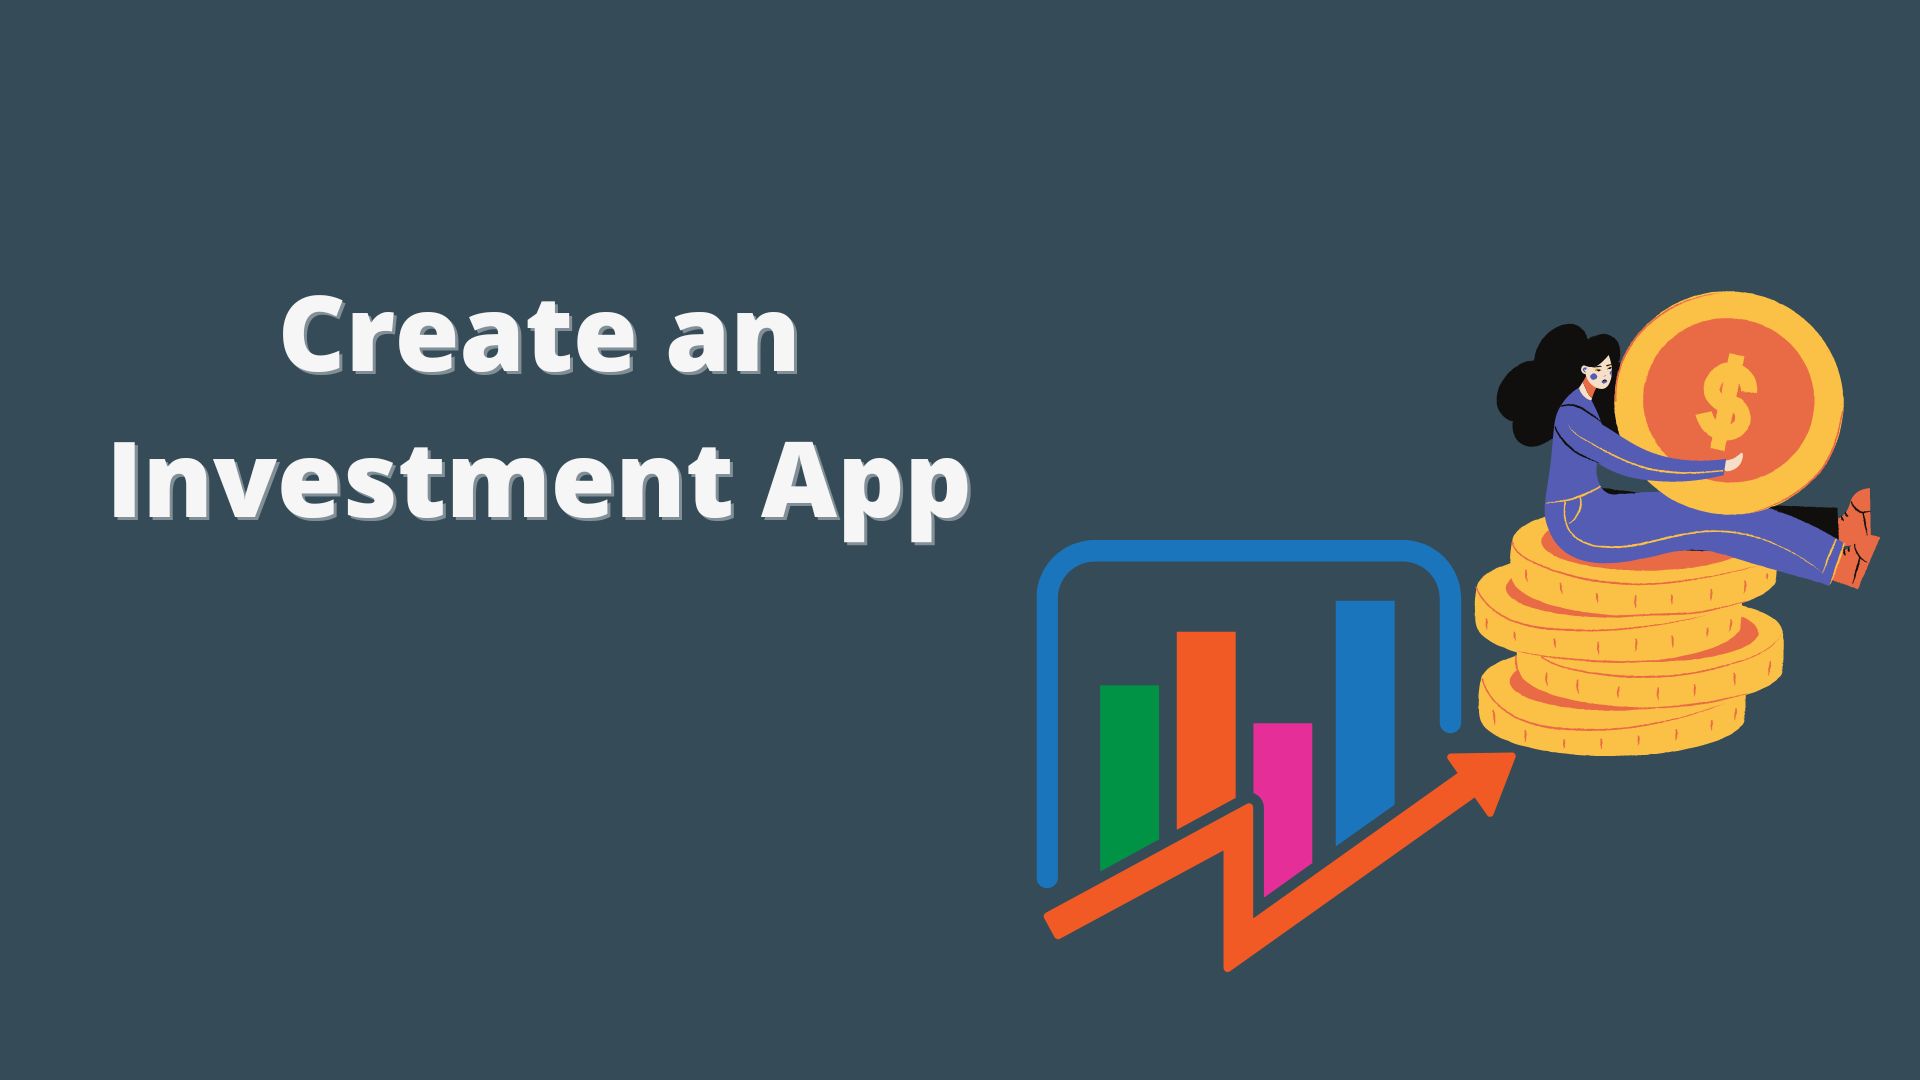 Create an Investment App: Recipe for Secure Investment’22